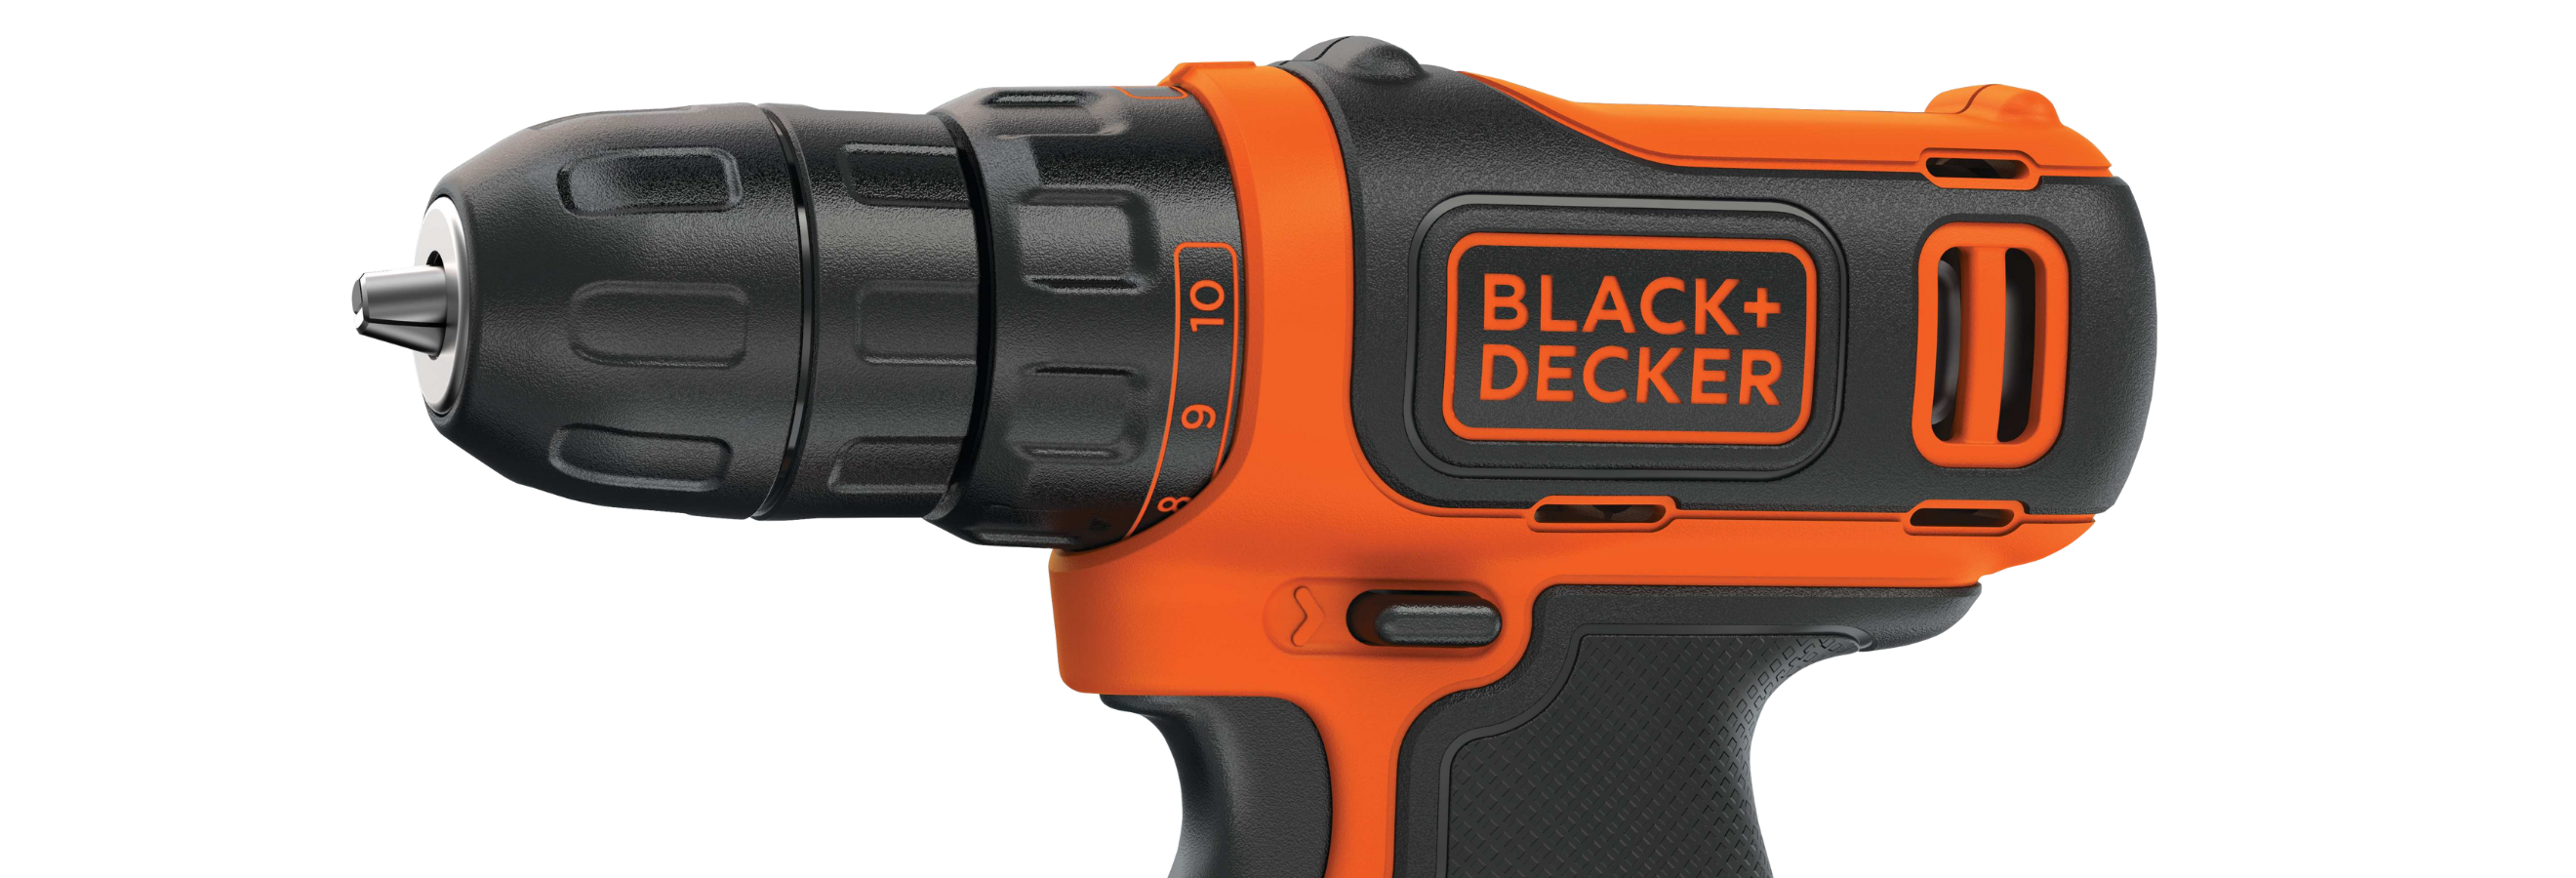  BLACK+DECKER 12V MAX Cordless Drill/Driver with MarkIT Picture  Hanging Tool Kit (BDCDD12C & BDMKIT101C)